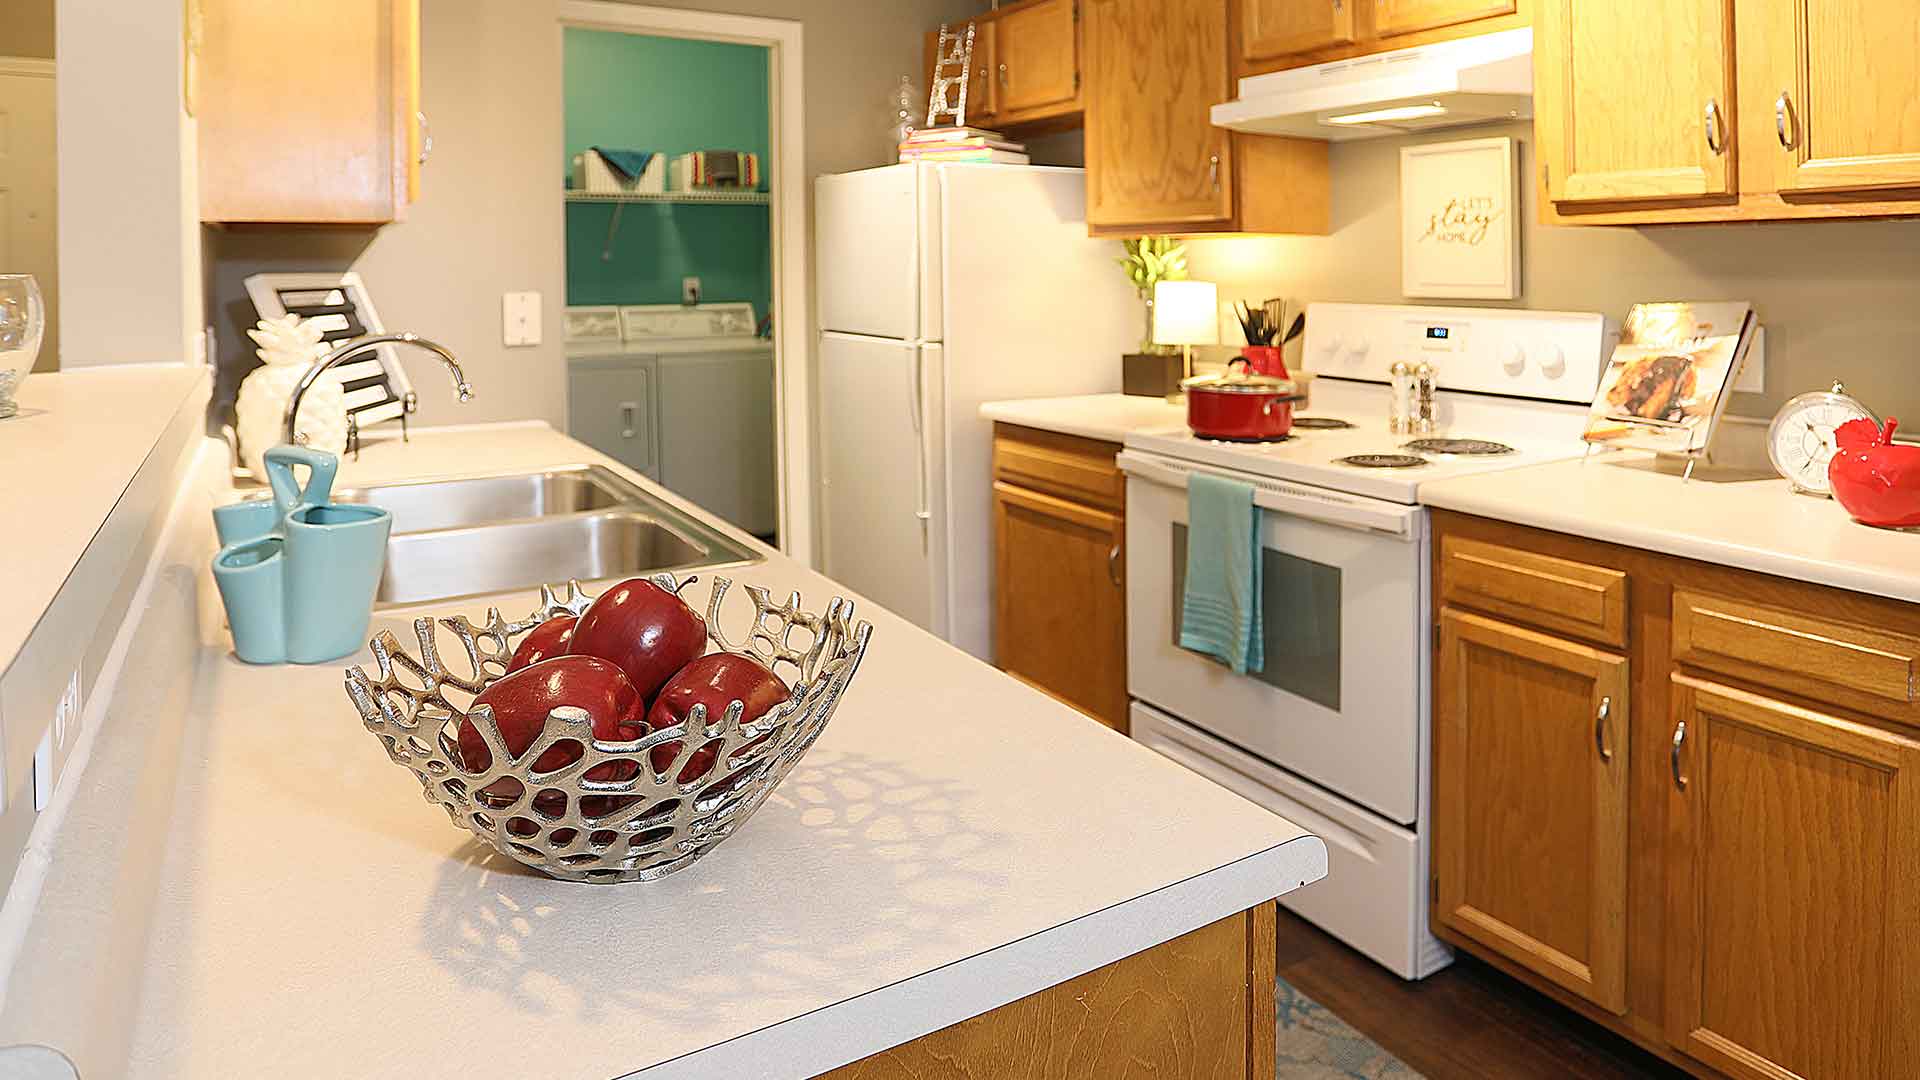 Decorated kitchen and adjacent laundry area at Wellington Place.